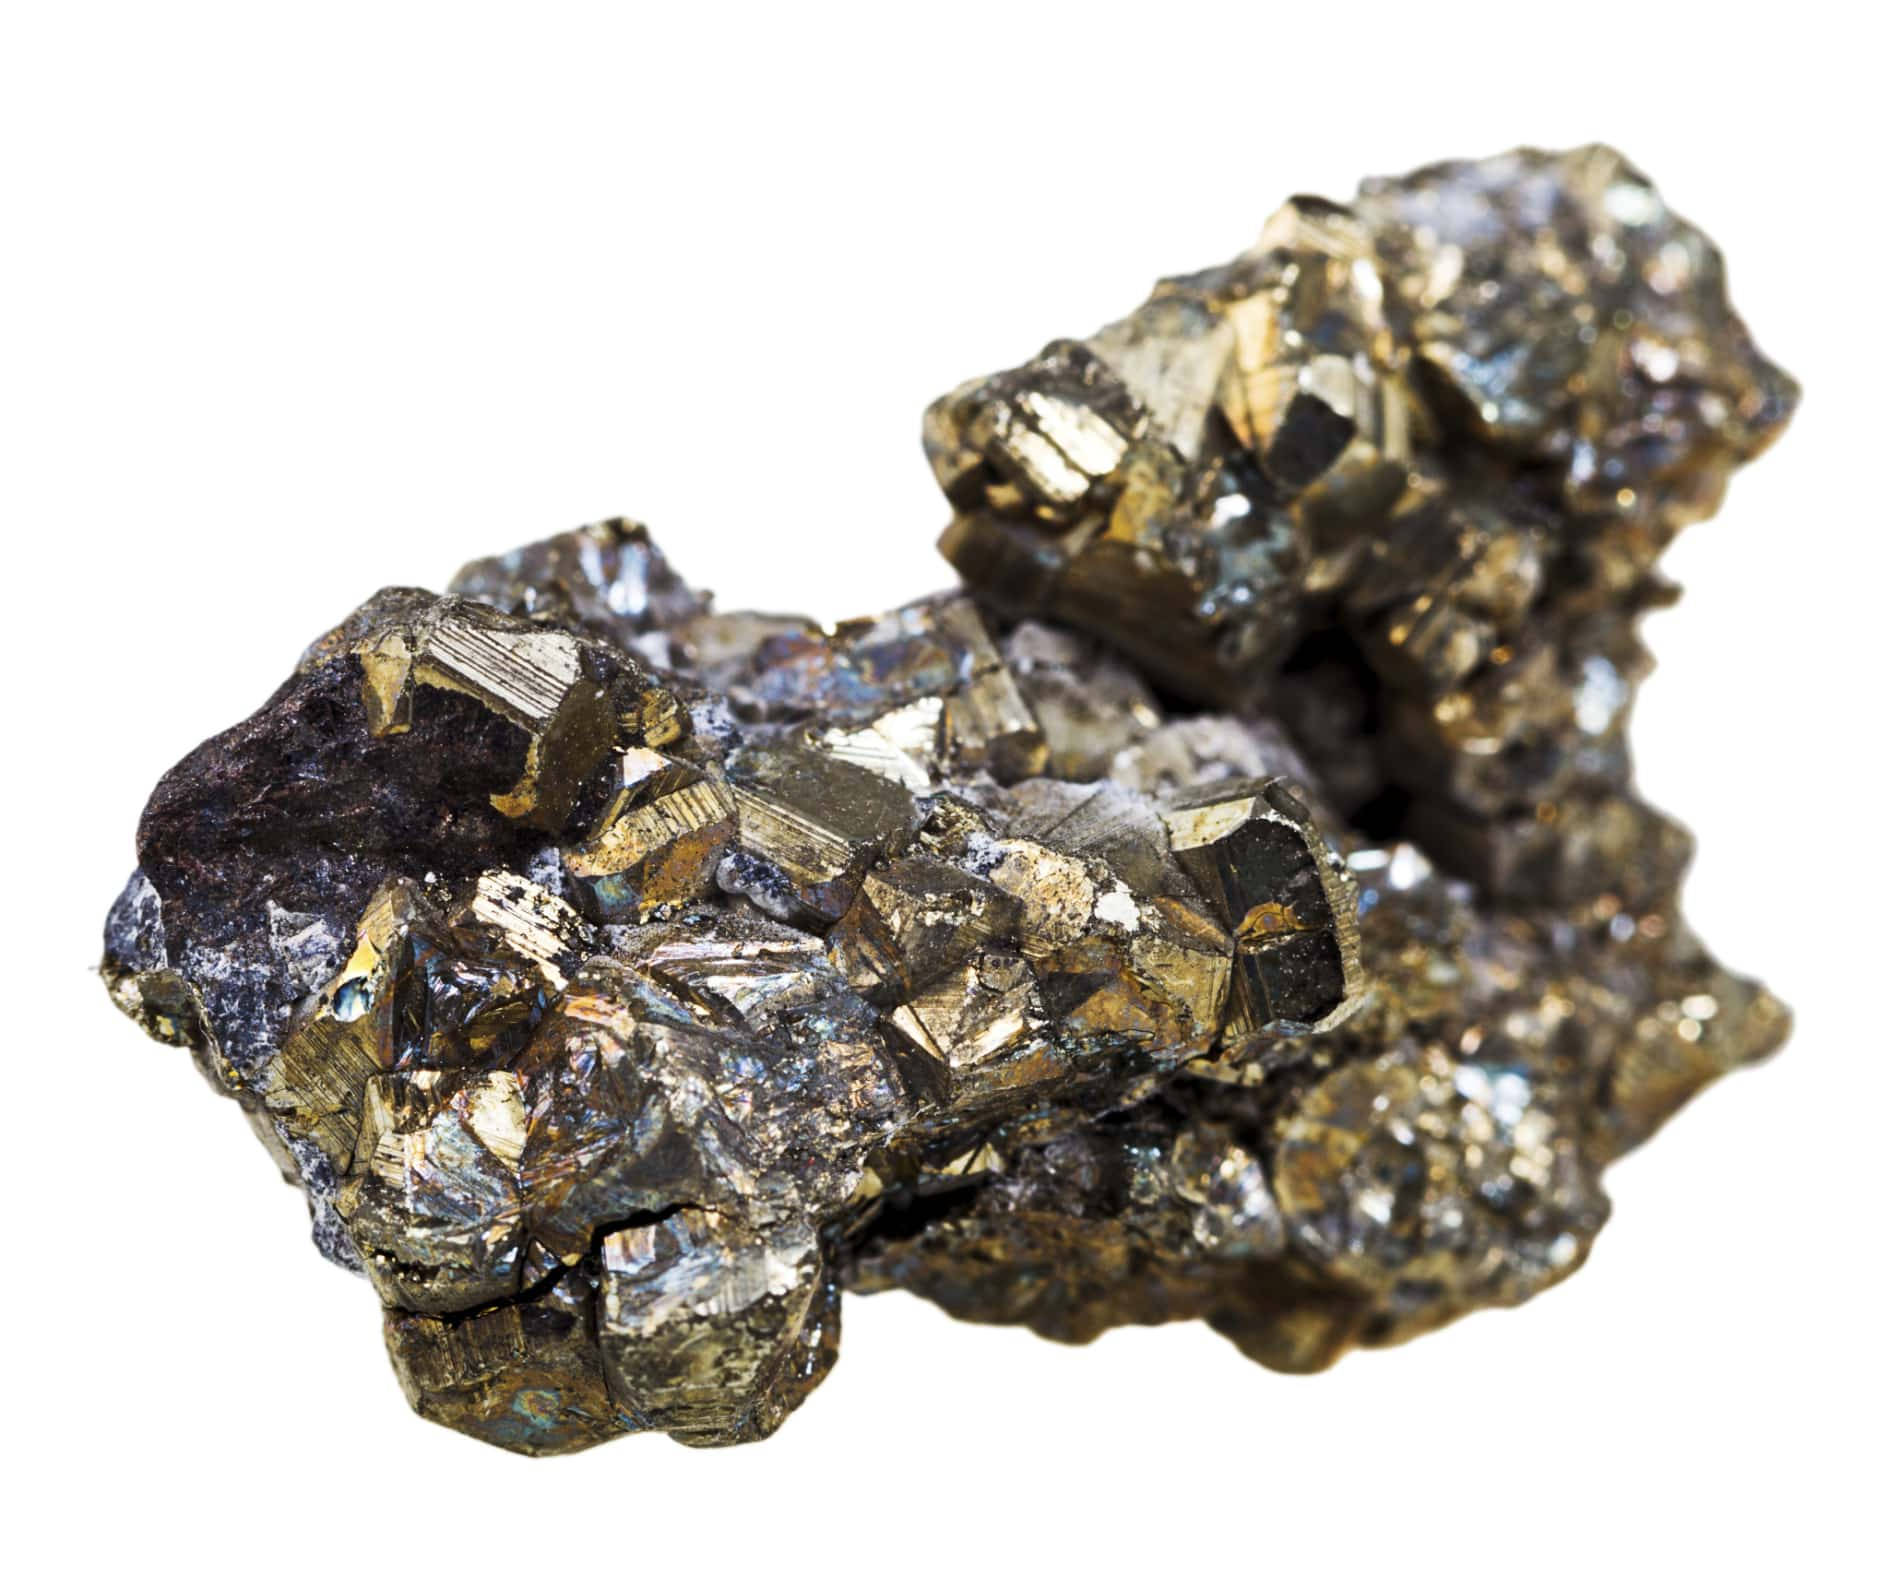 Pyrite That Contains Iron Up-close Wallpaper